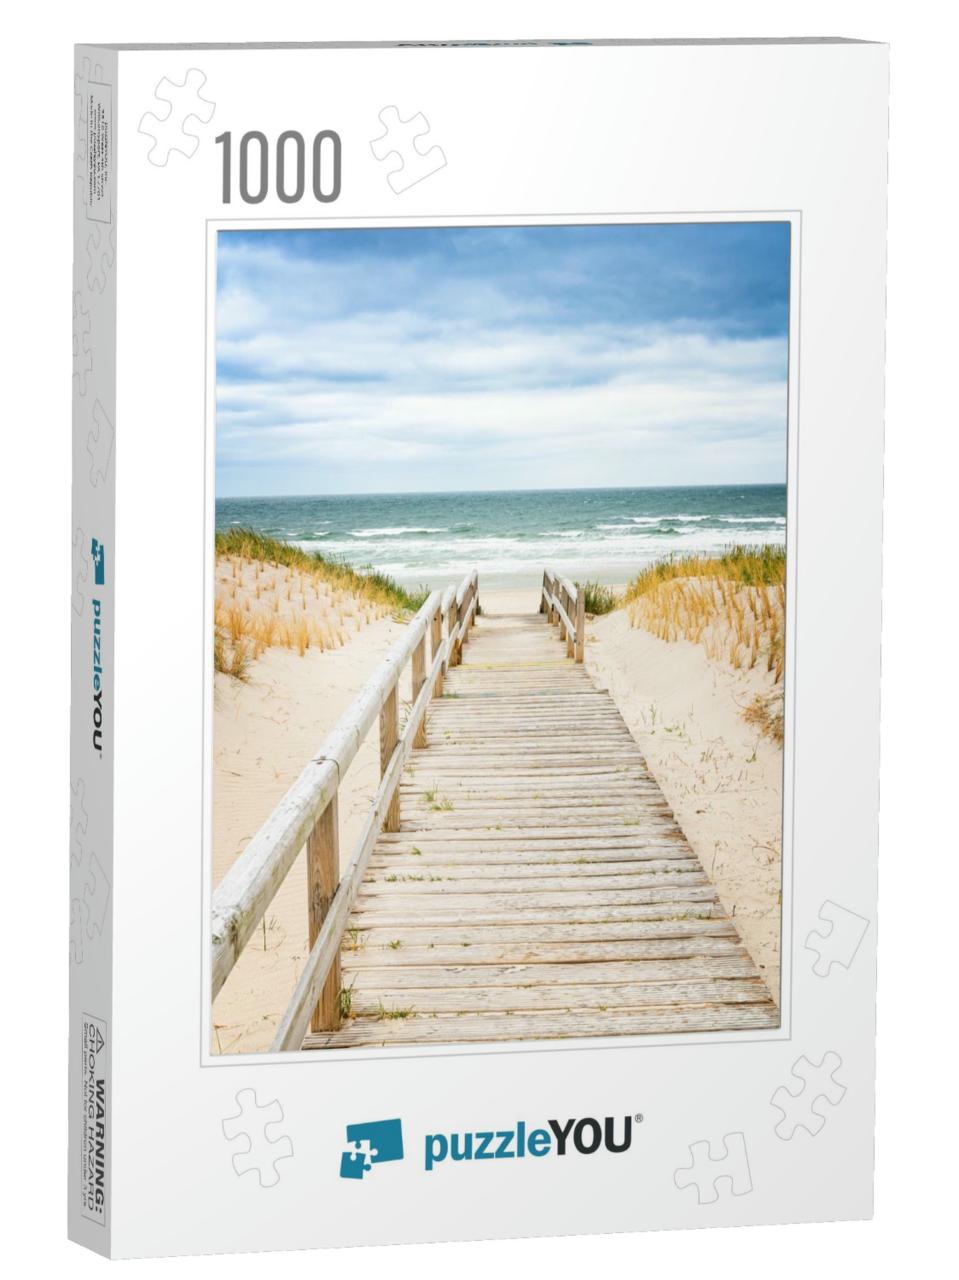 Wooden Footpath on Dune on Sylt. Entrance for the Beach... Jigsaw Puzzle with 1000 pieces